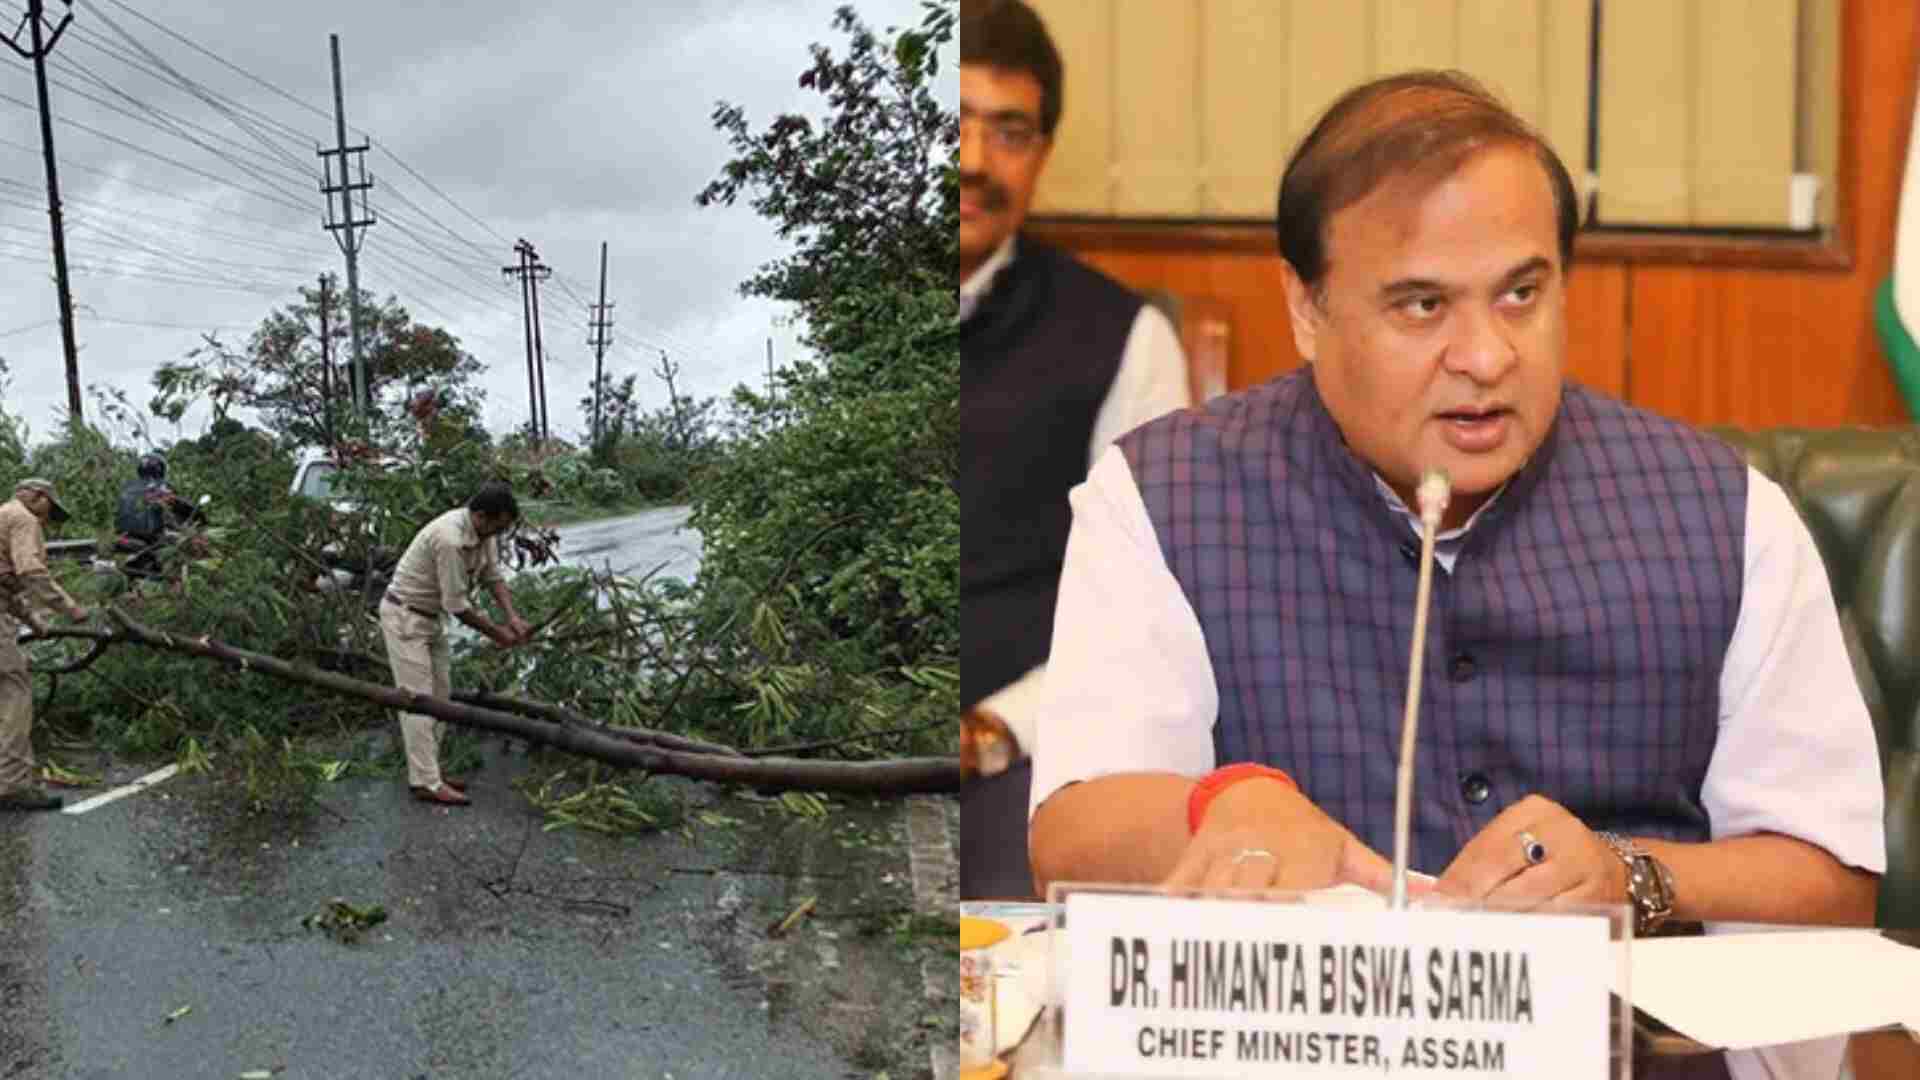 Heavy Storms Lash Parts Of Assam, CM Sarma Instructs To Be On Alert